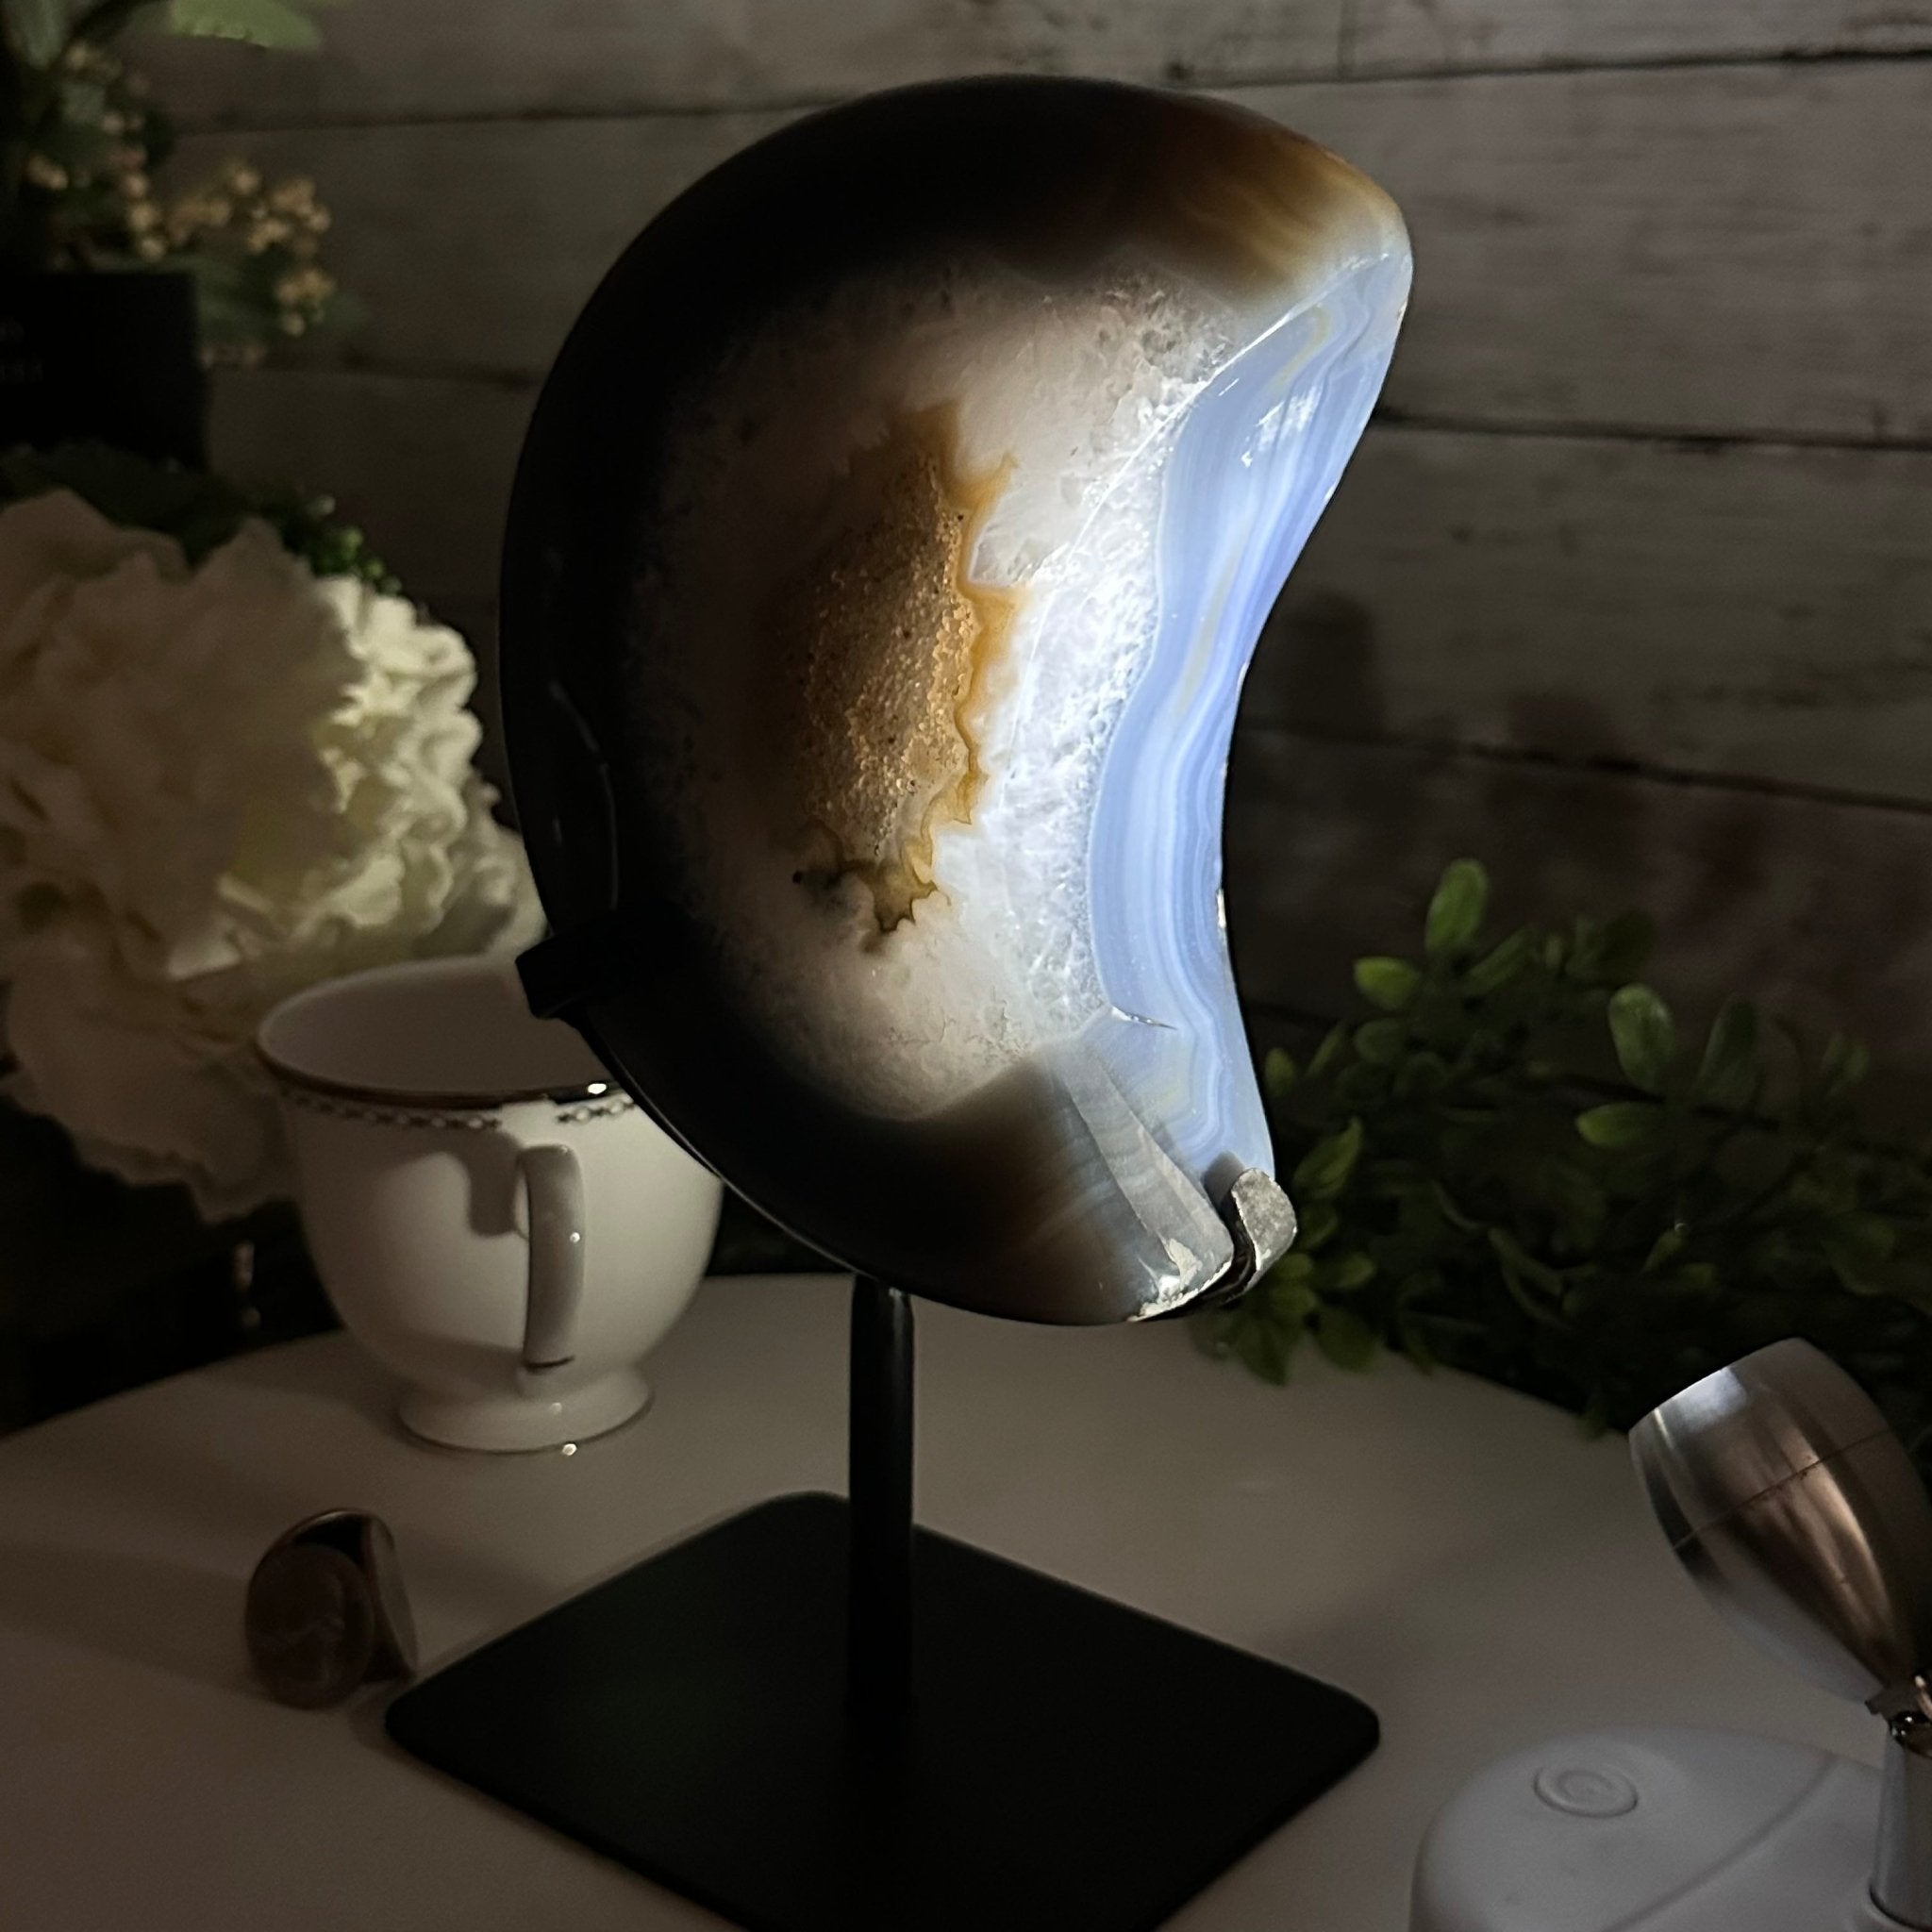 Polished Agate Crescent Moon on a Stand, 4.8 lbs & 9.4" Tall #5740NA-005 - Brazil GemsBrazil GemsPolished Agate Crescent Moon on a Stand, 4.8 lbs & 9.4" Tall #5740NA-005Crescent Moons5740NA-005